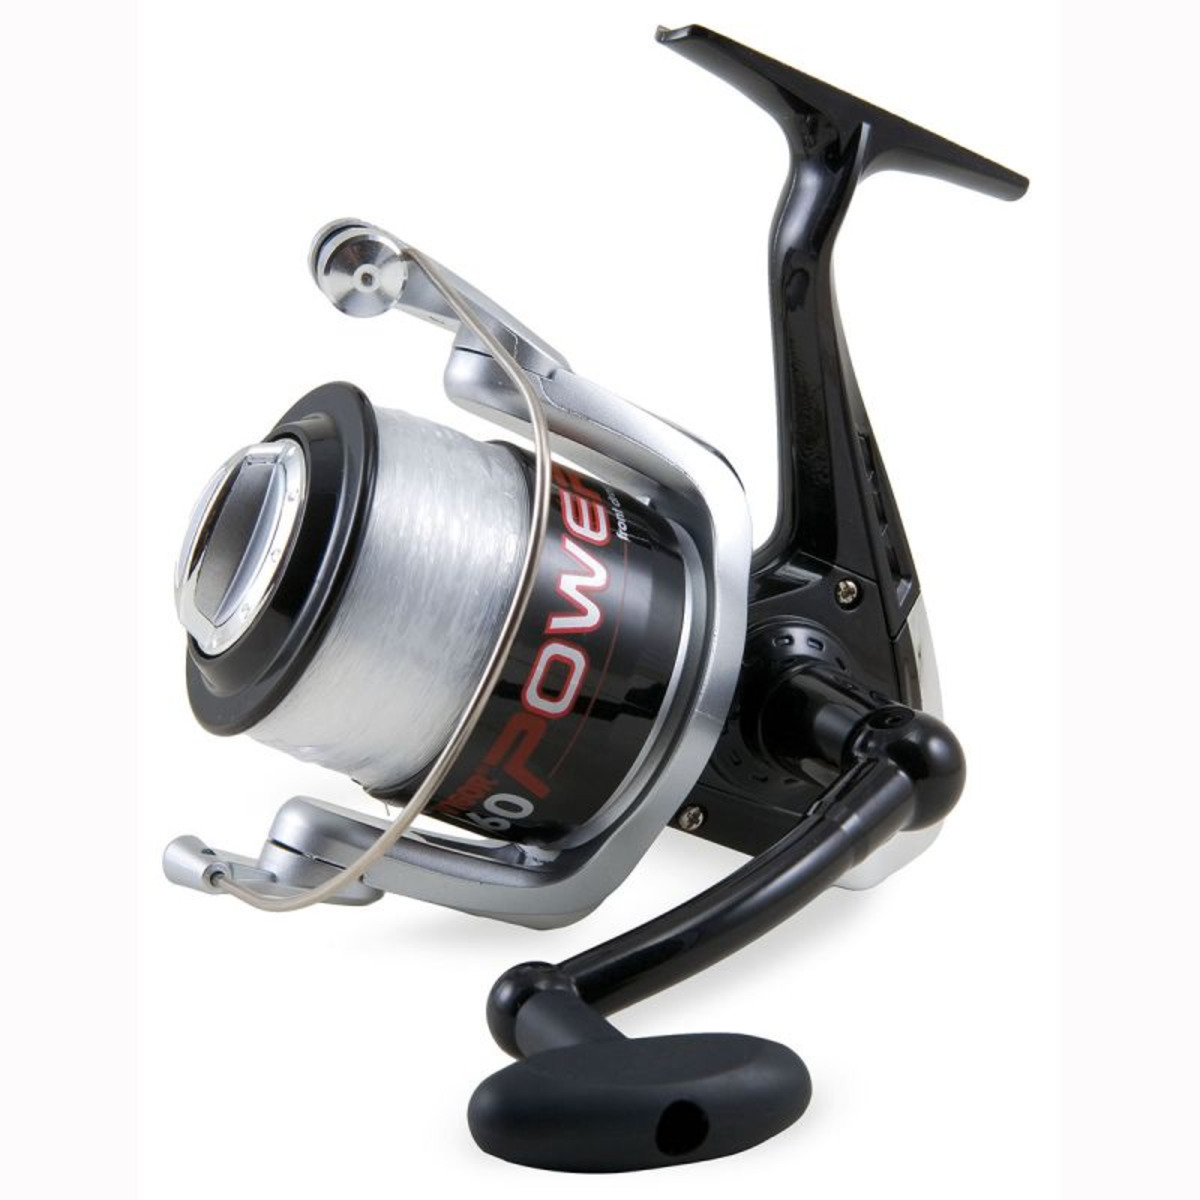 Beach Atlantic 8000 Front Drag 1346580 Sea Fishing Reel With Line Lineaeffe 